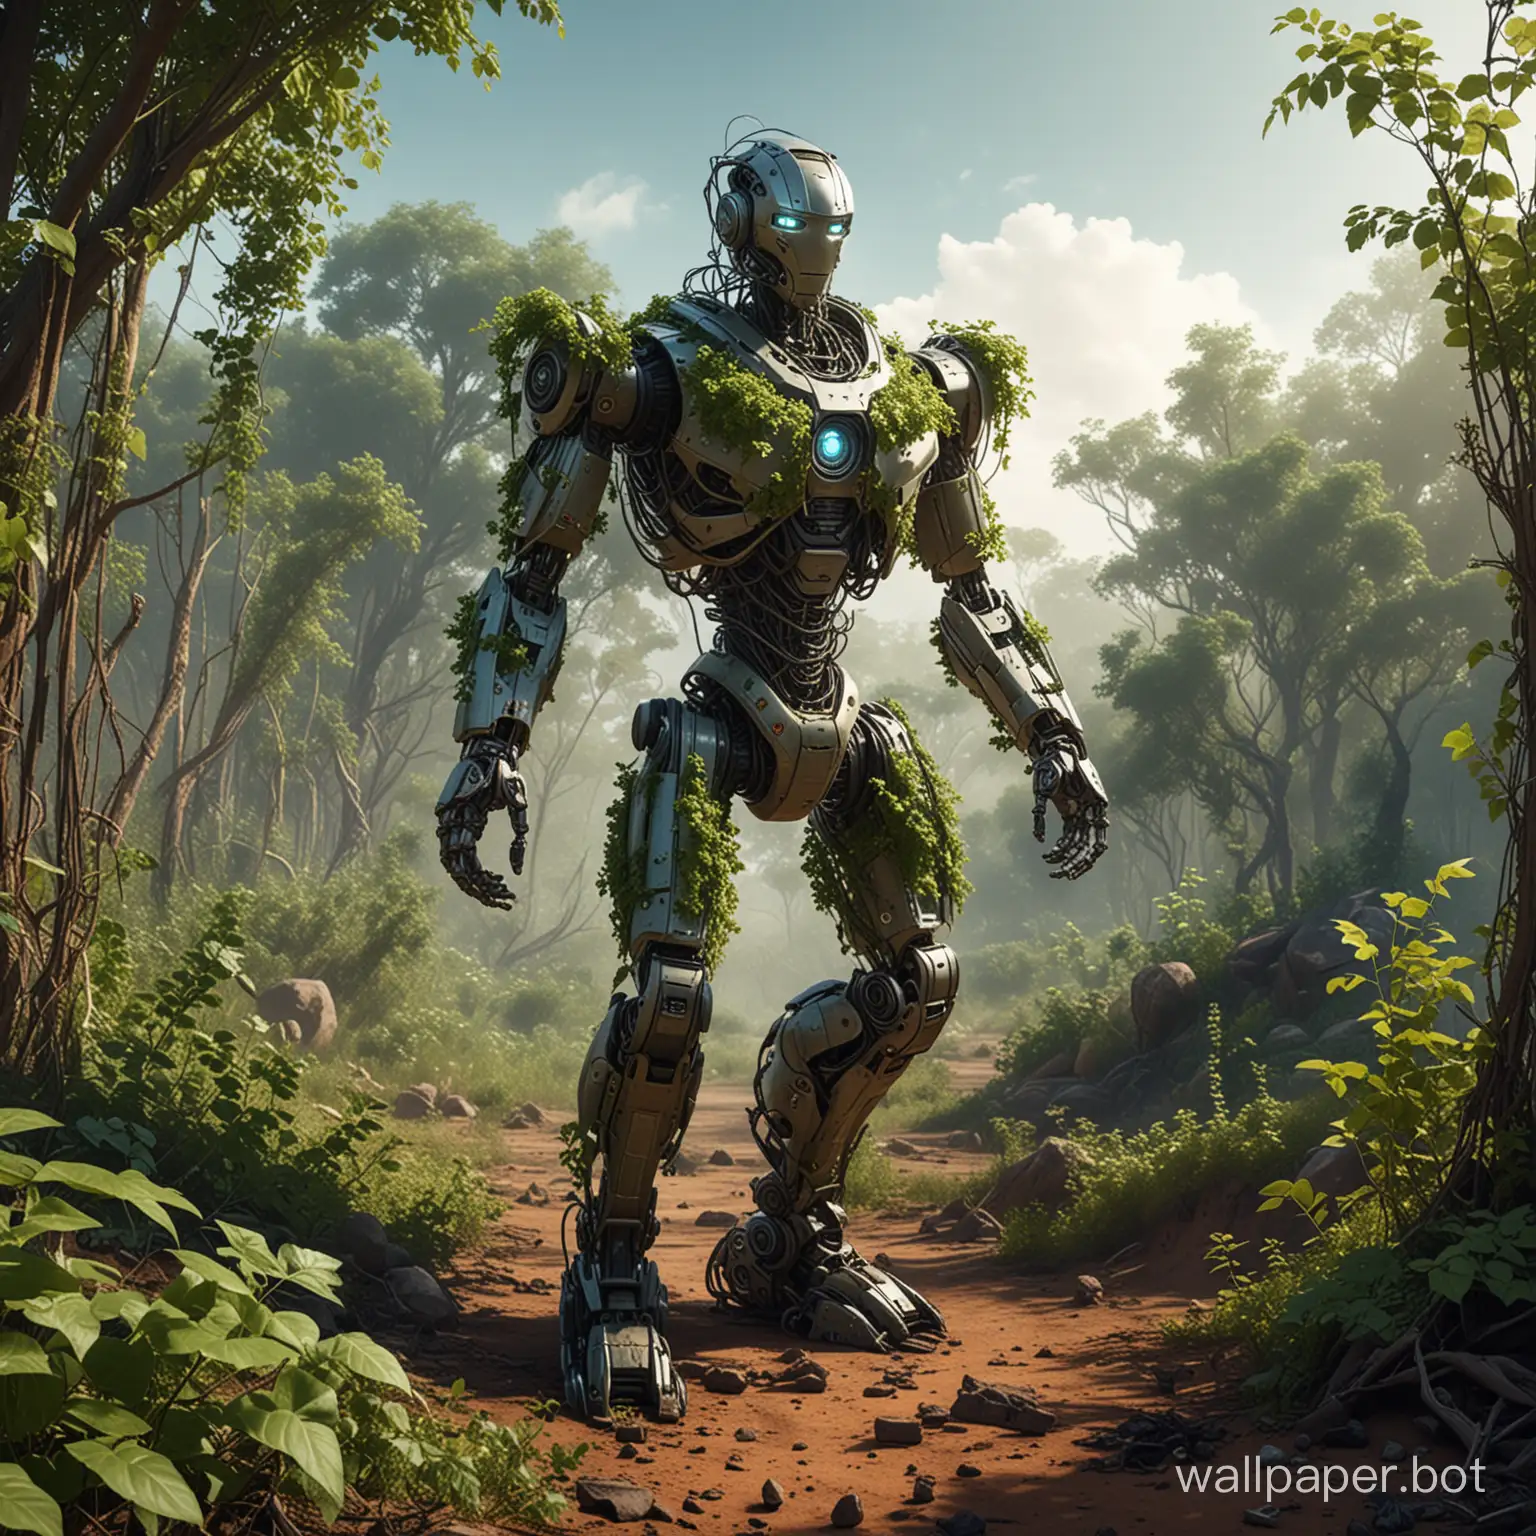 The robot landed on a planet where nature reigns, the robot was overgrown with vines